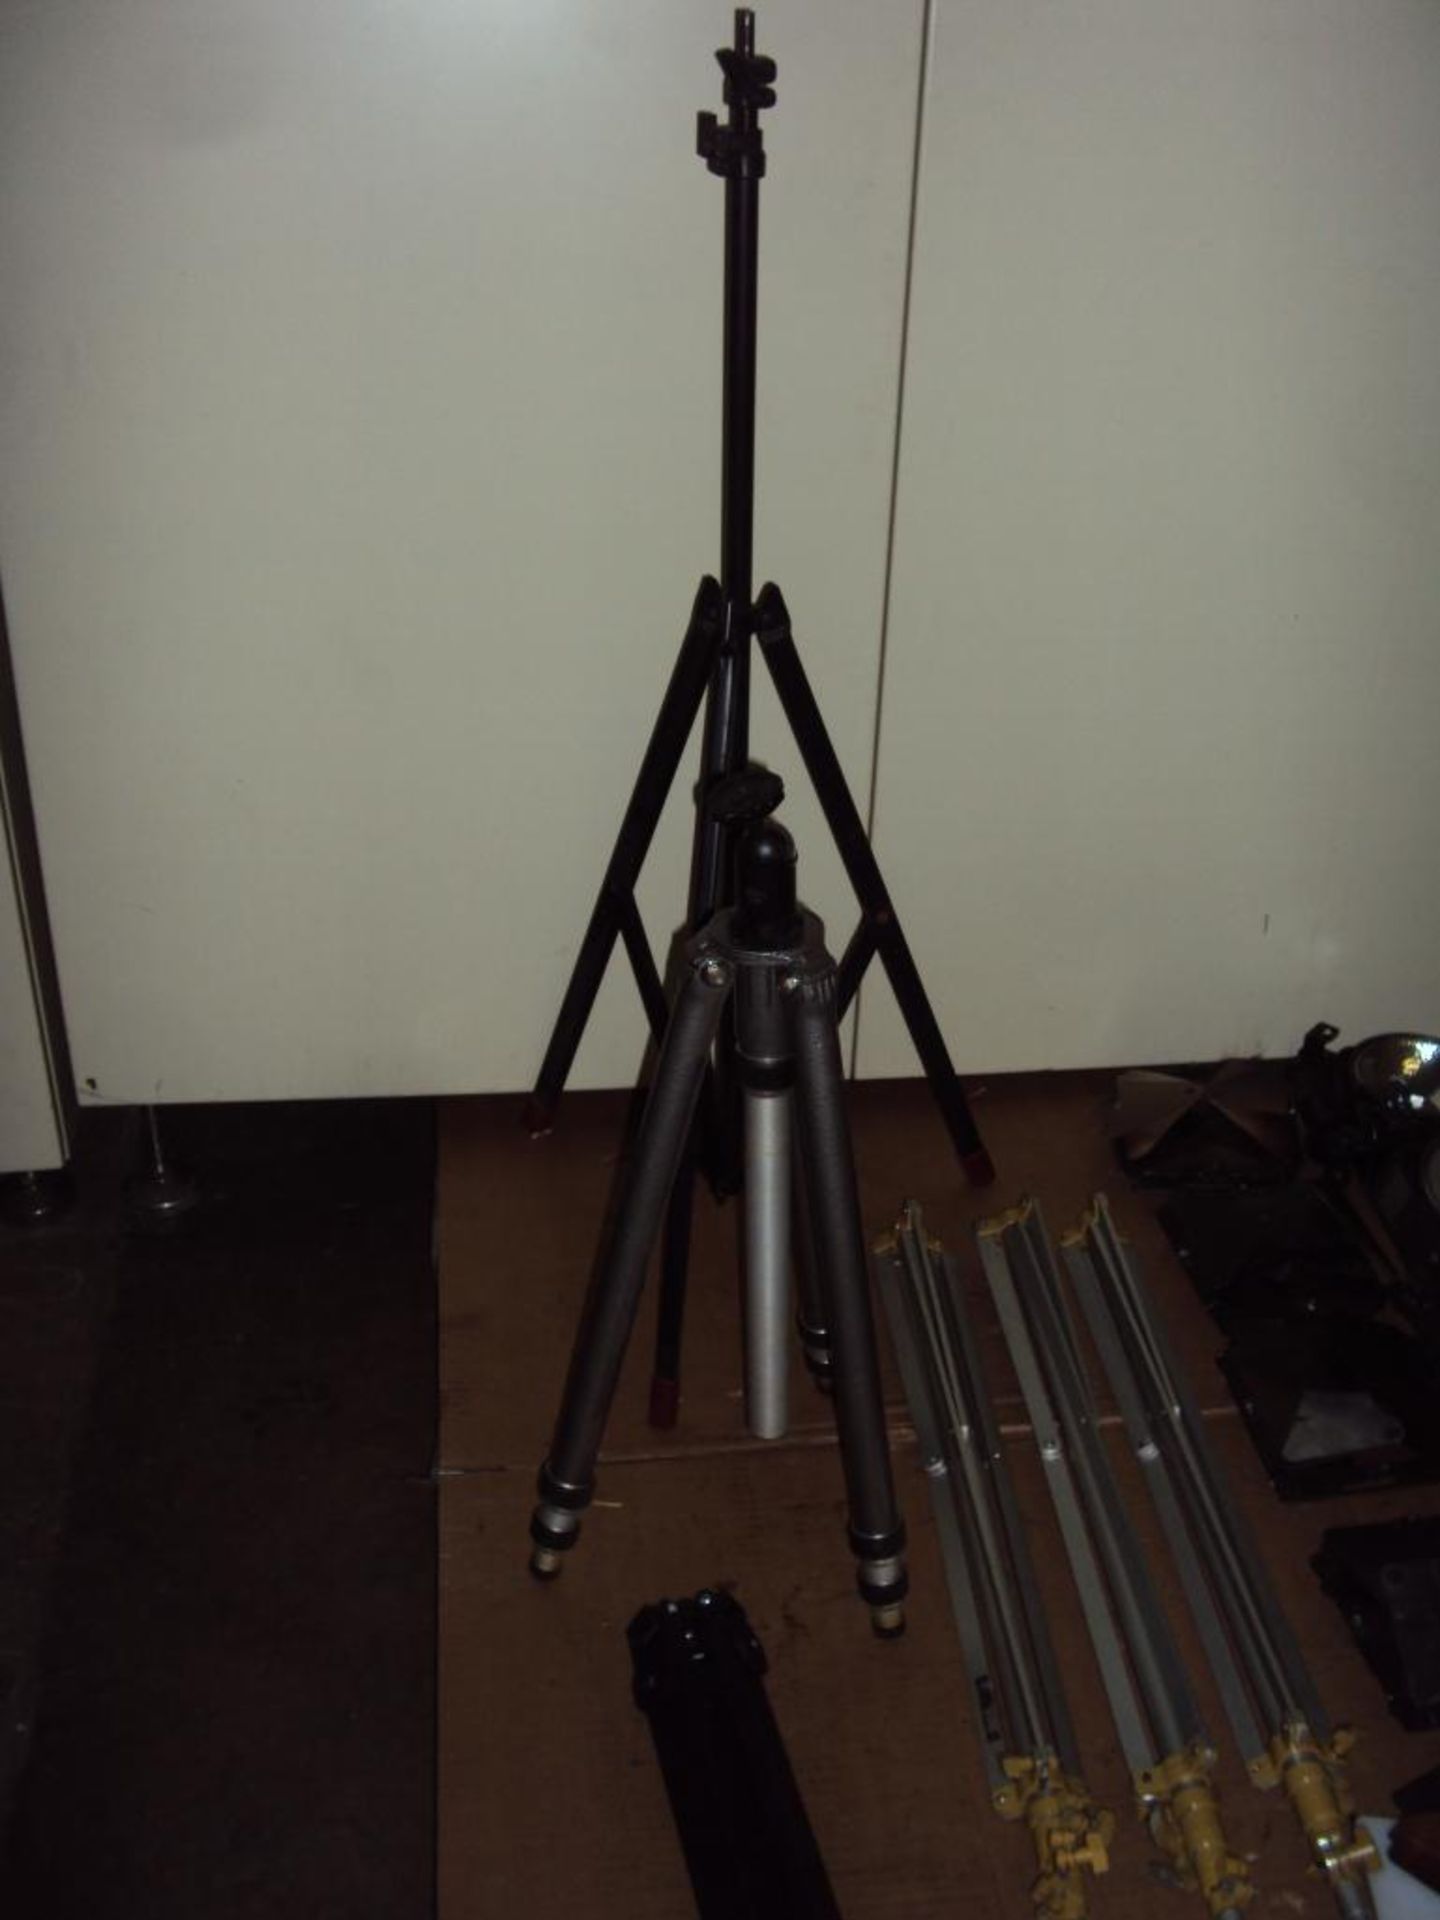 Lot of Tripods, Light Stands, Lights & Shutters - Image 2 of 5